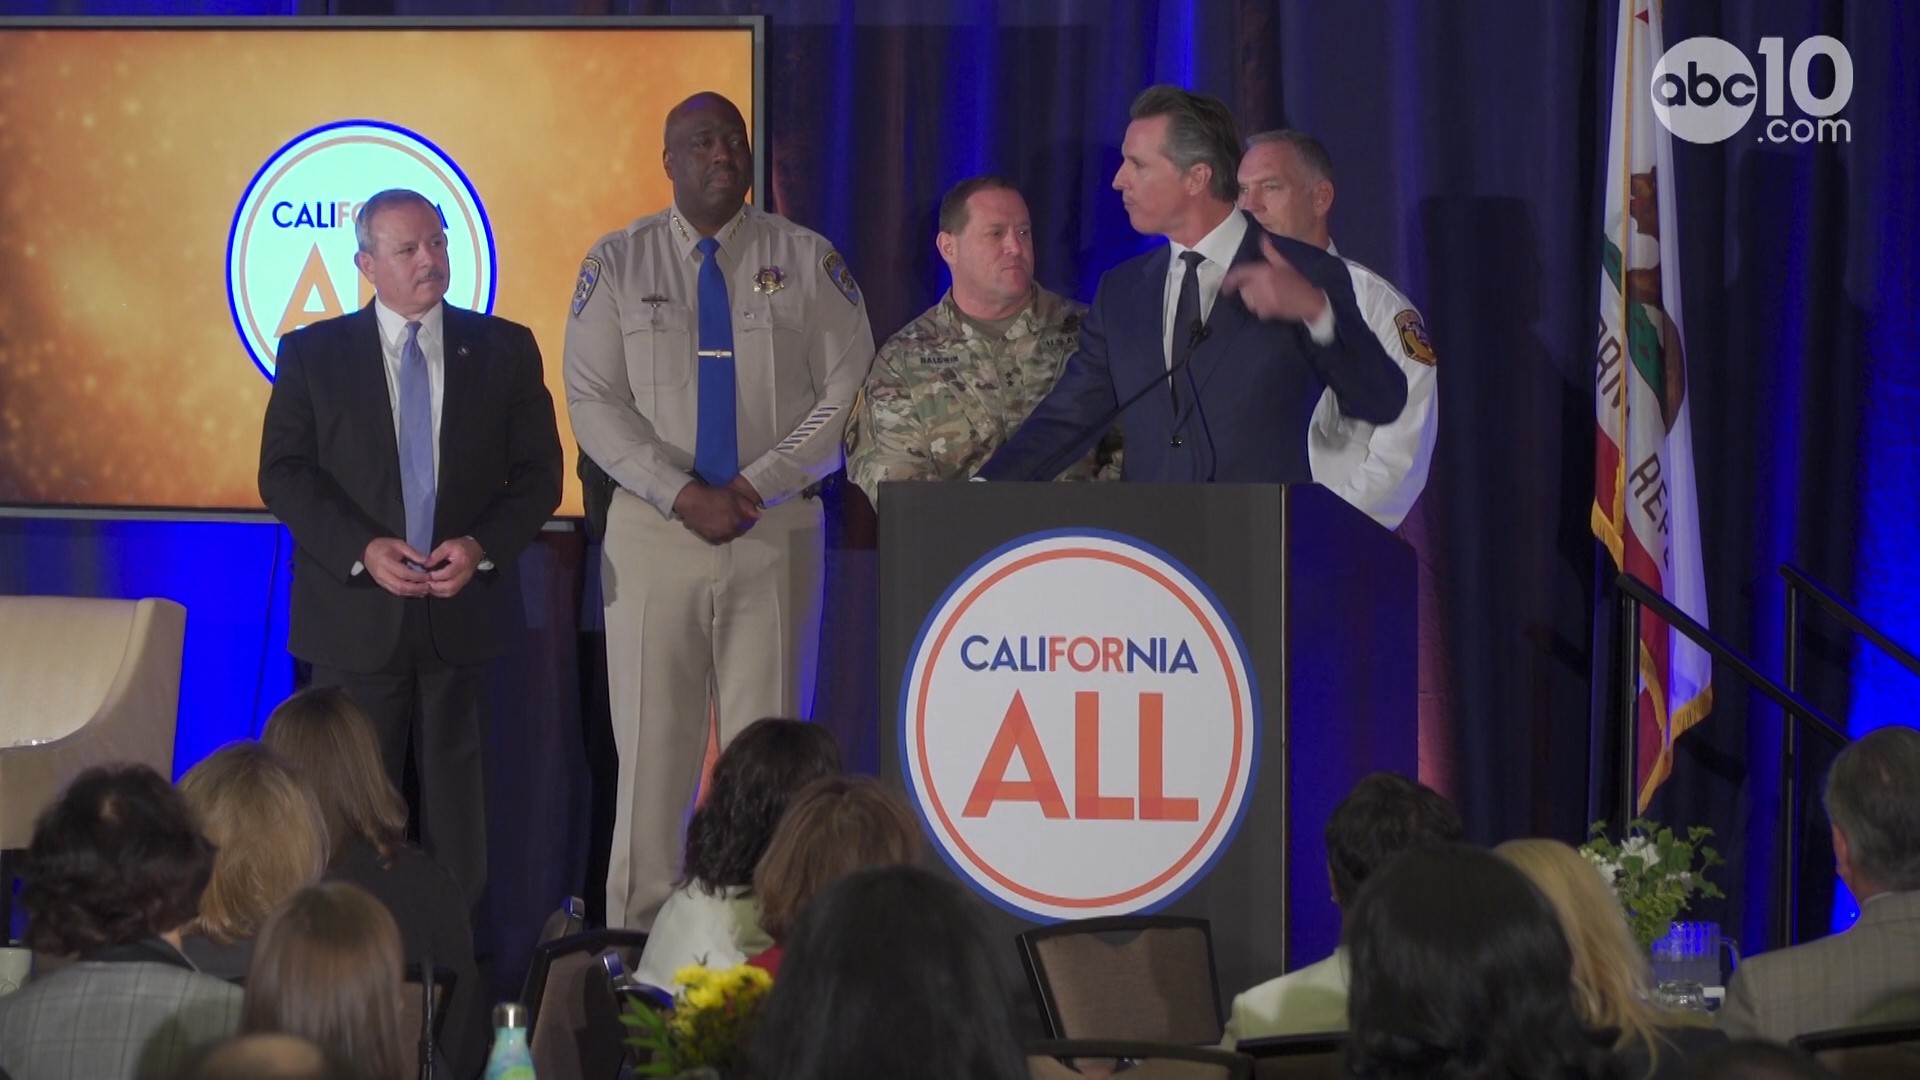 Governor Gavin Newsom said California cannot take another "2018" again. At a summit, he called for wildfire accountability.